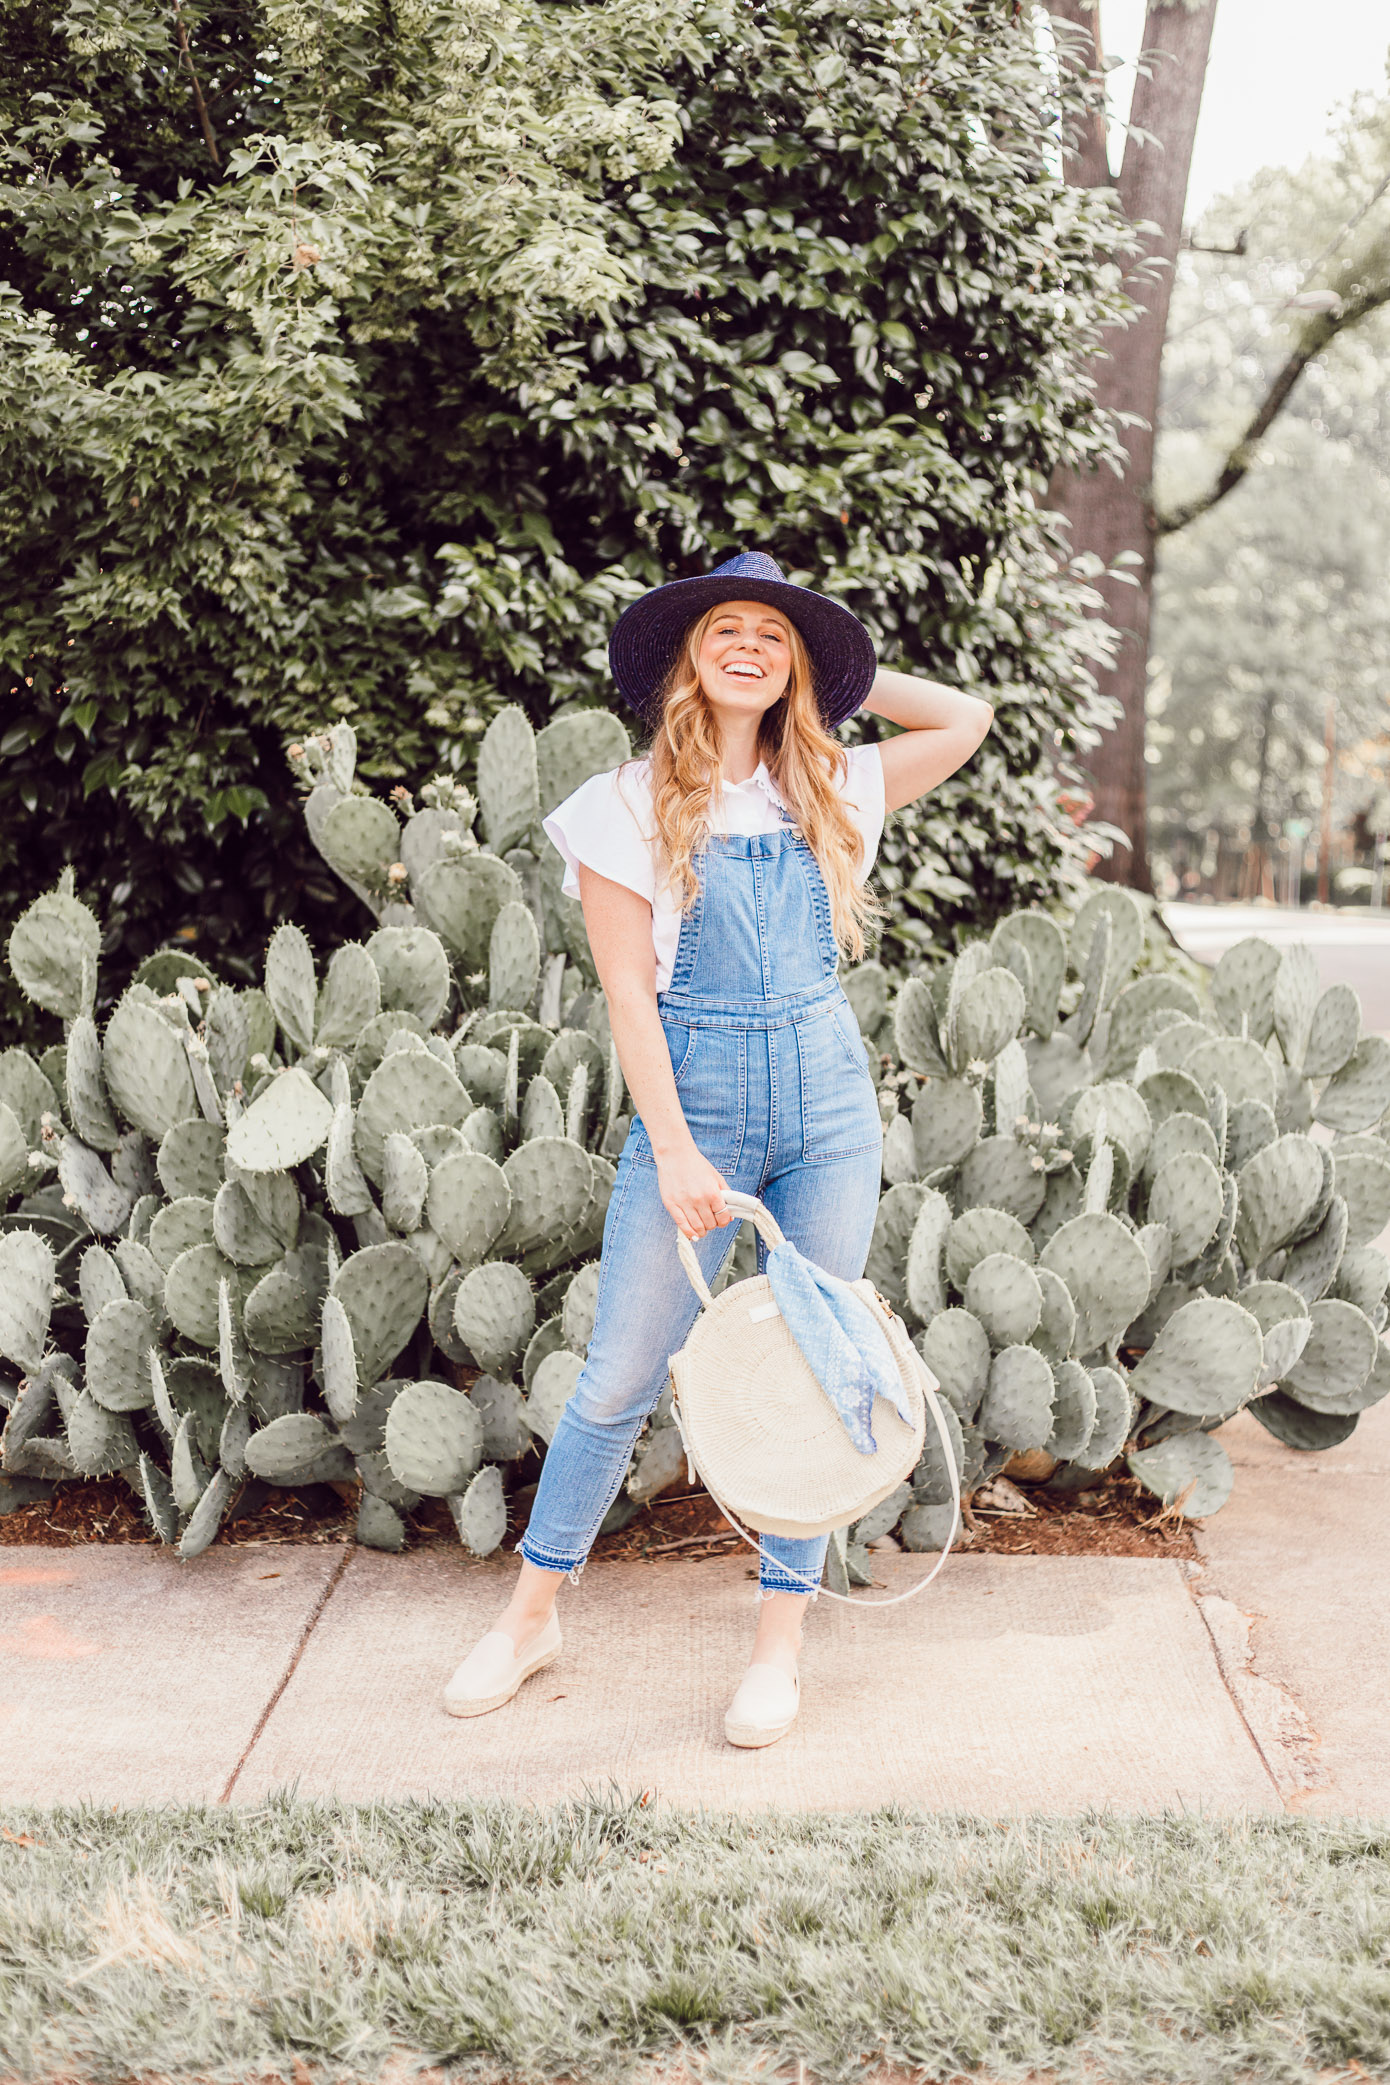 Summer Weekend Overalls Outfit Idea | How to Style Overalls for the Summer featured on Louella Reese #overalls #summerstyle